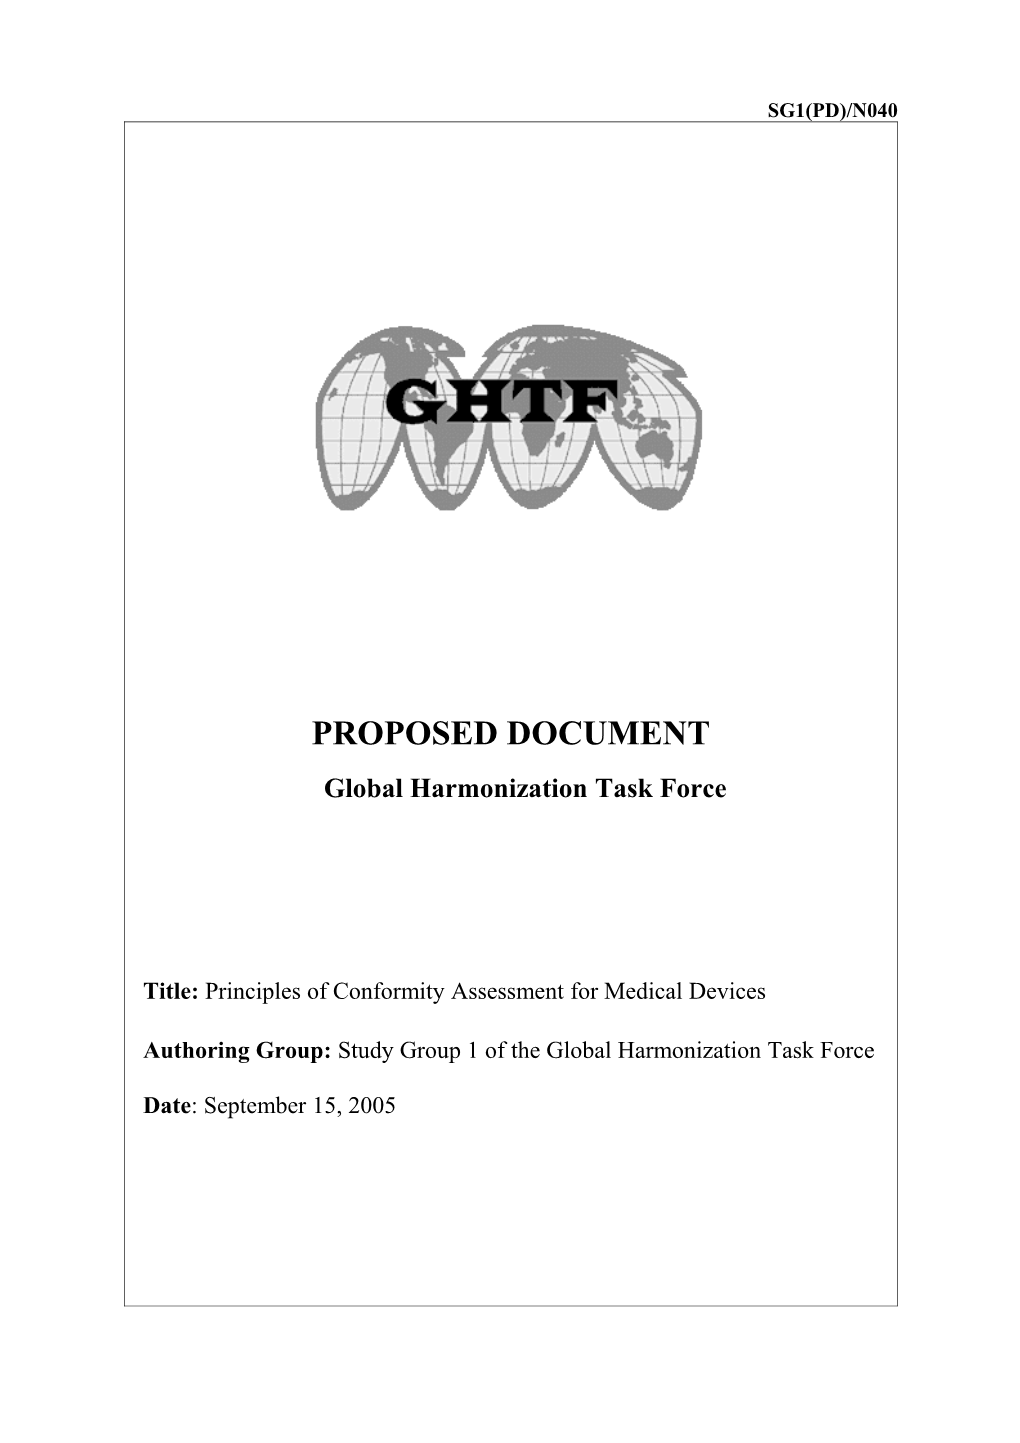 GHTF SG1 - Principles of Conformity Assessment for Medical Devices - September 2005